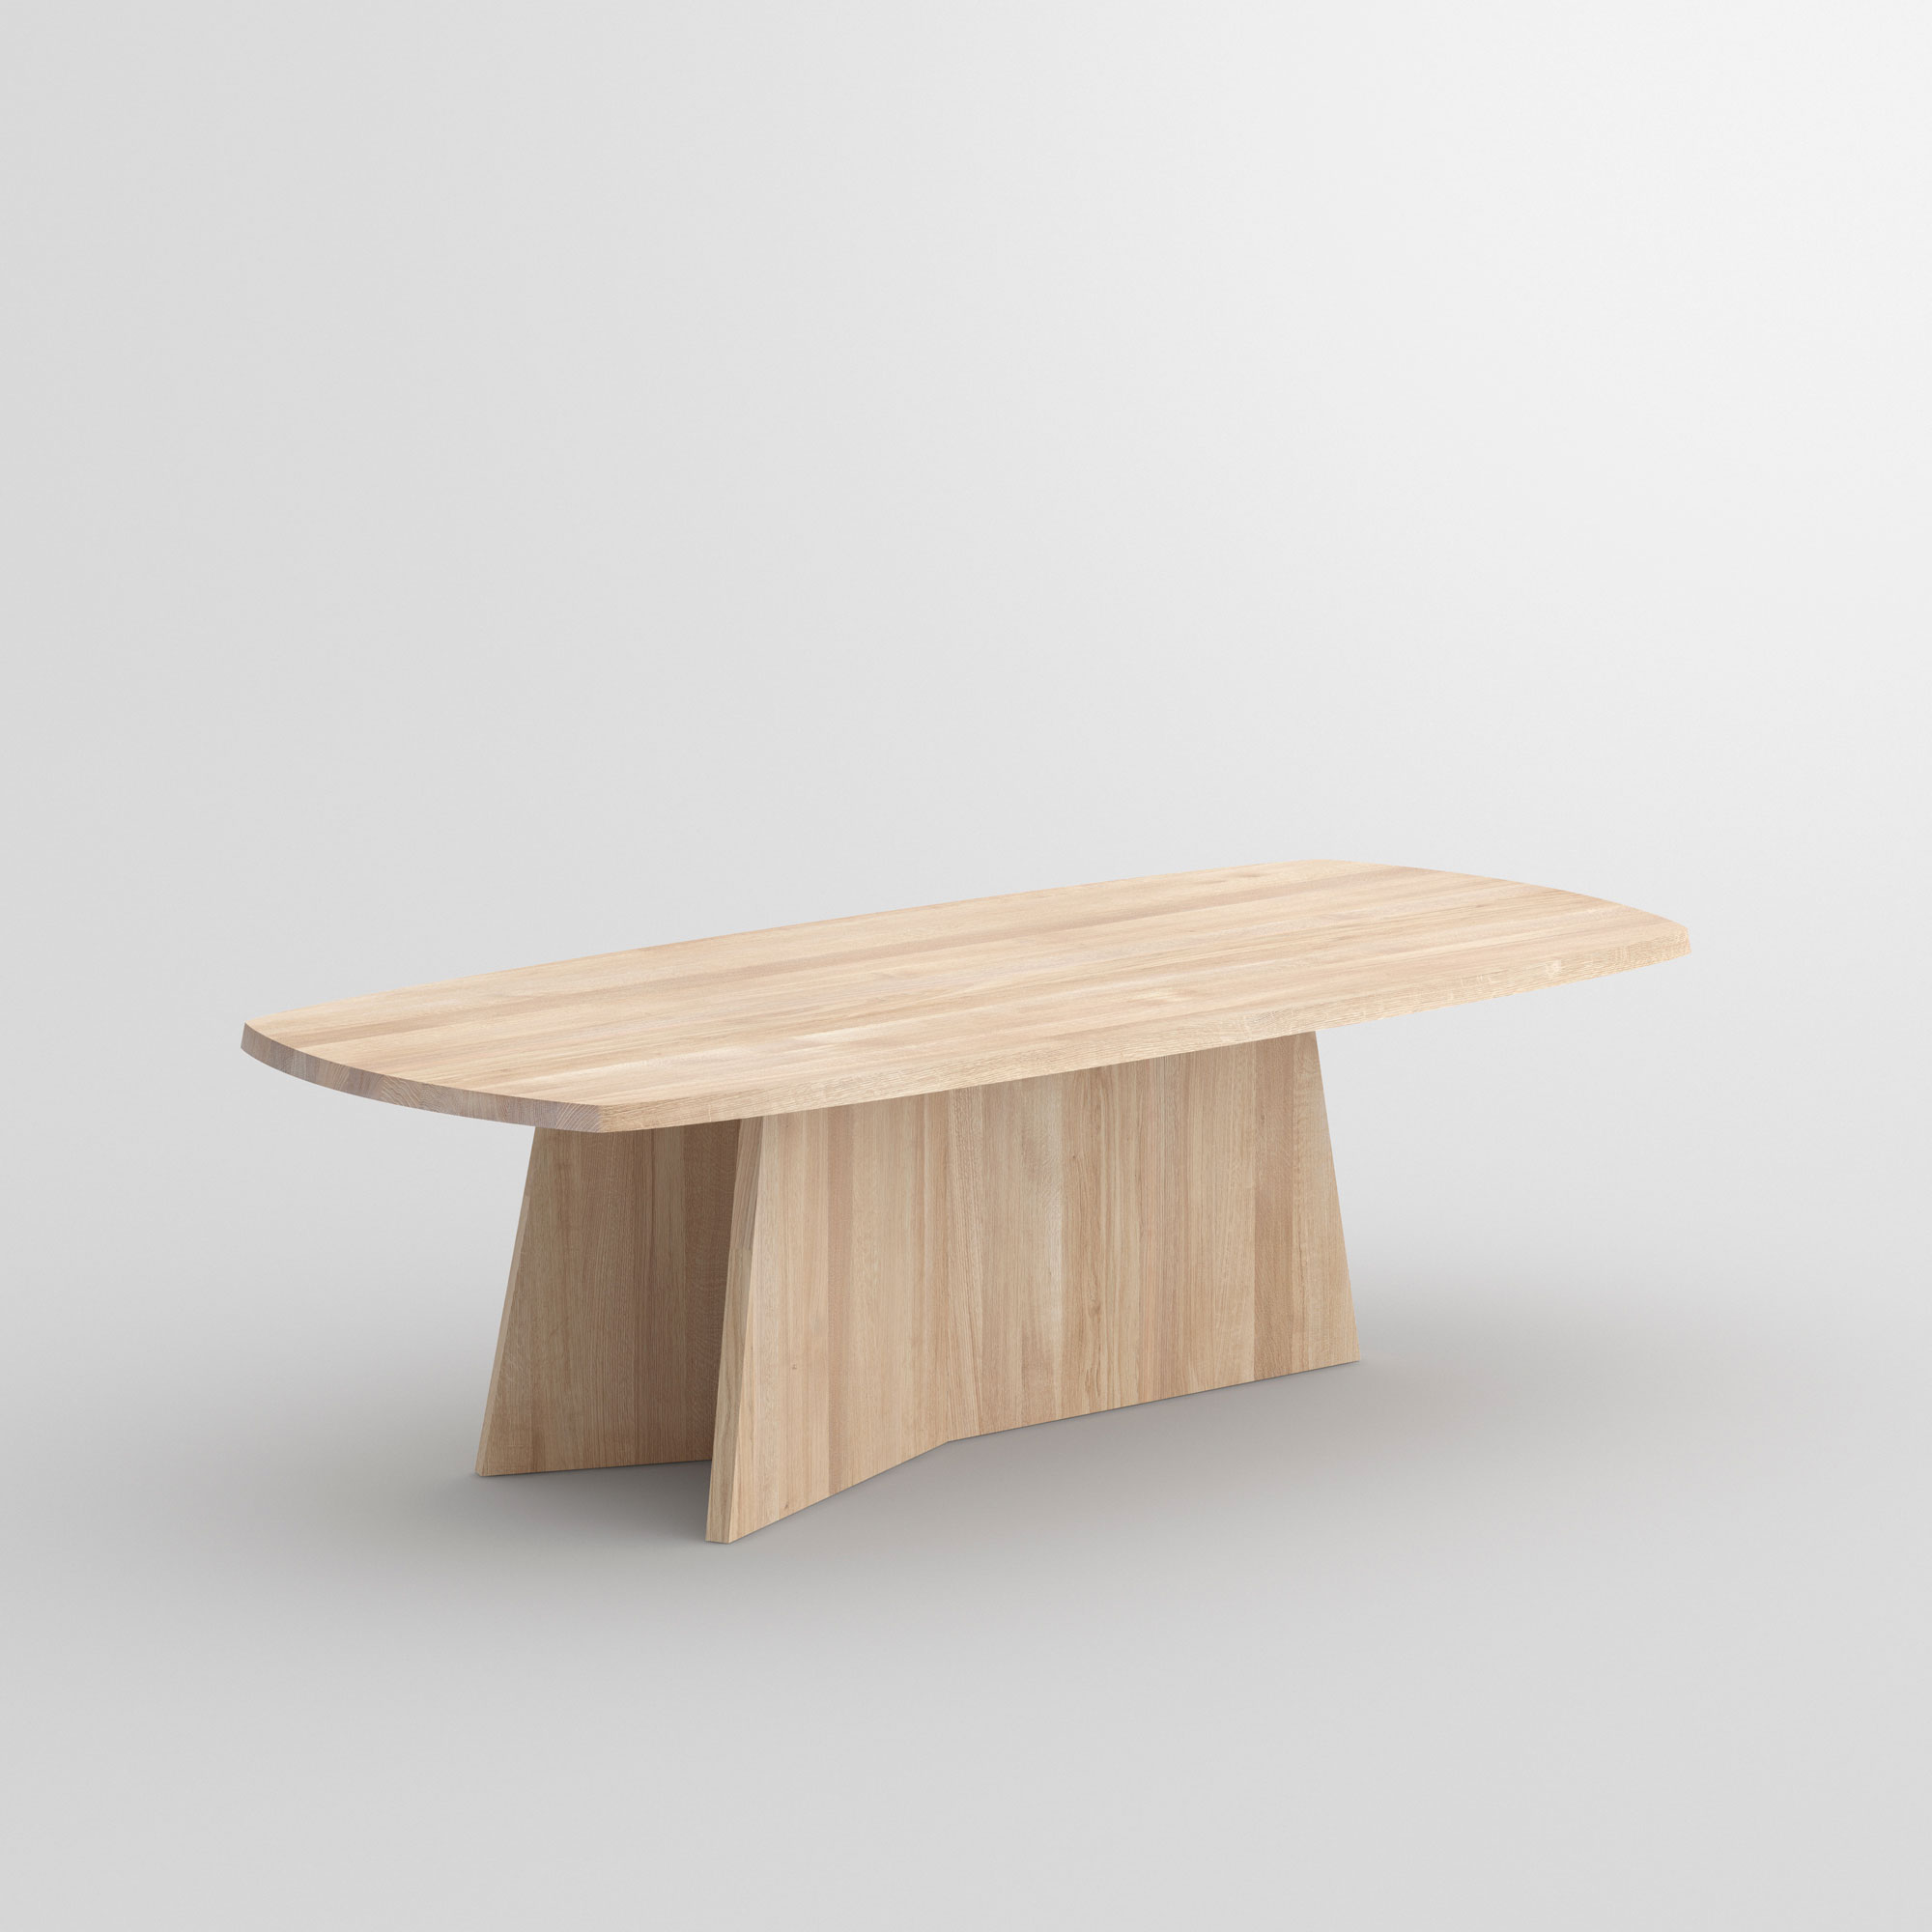 Design Dining Table LOTUS cam1 custom made in solid wood by vitamin design